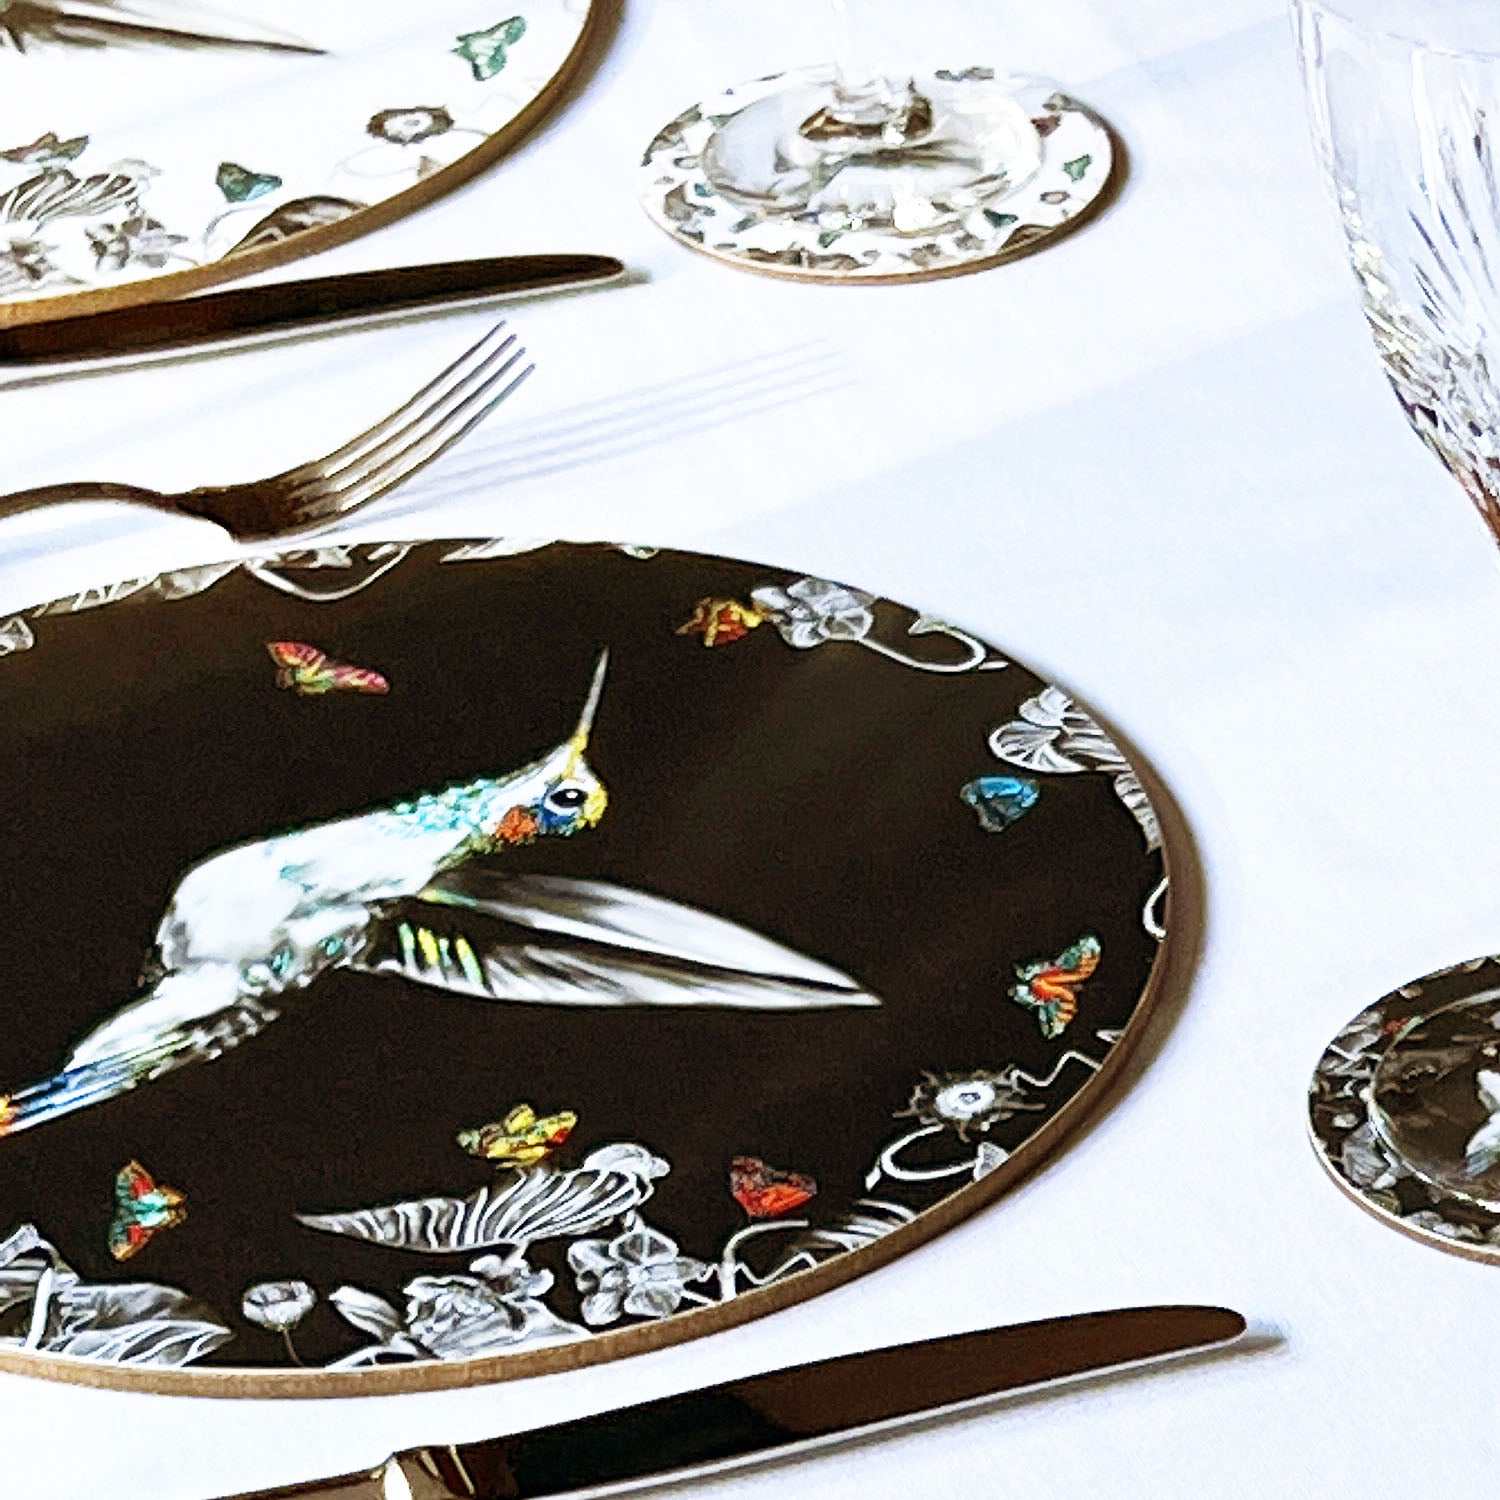 Black hummingbird placemat in table setting